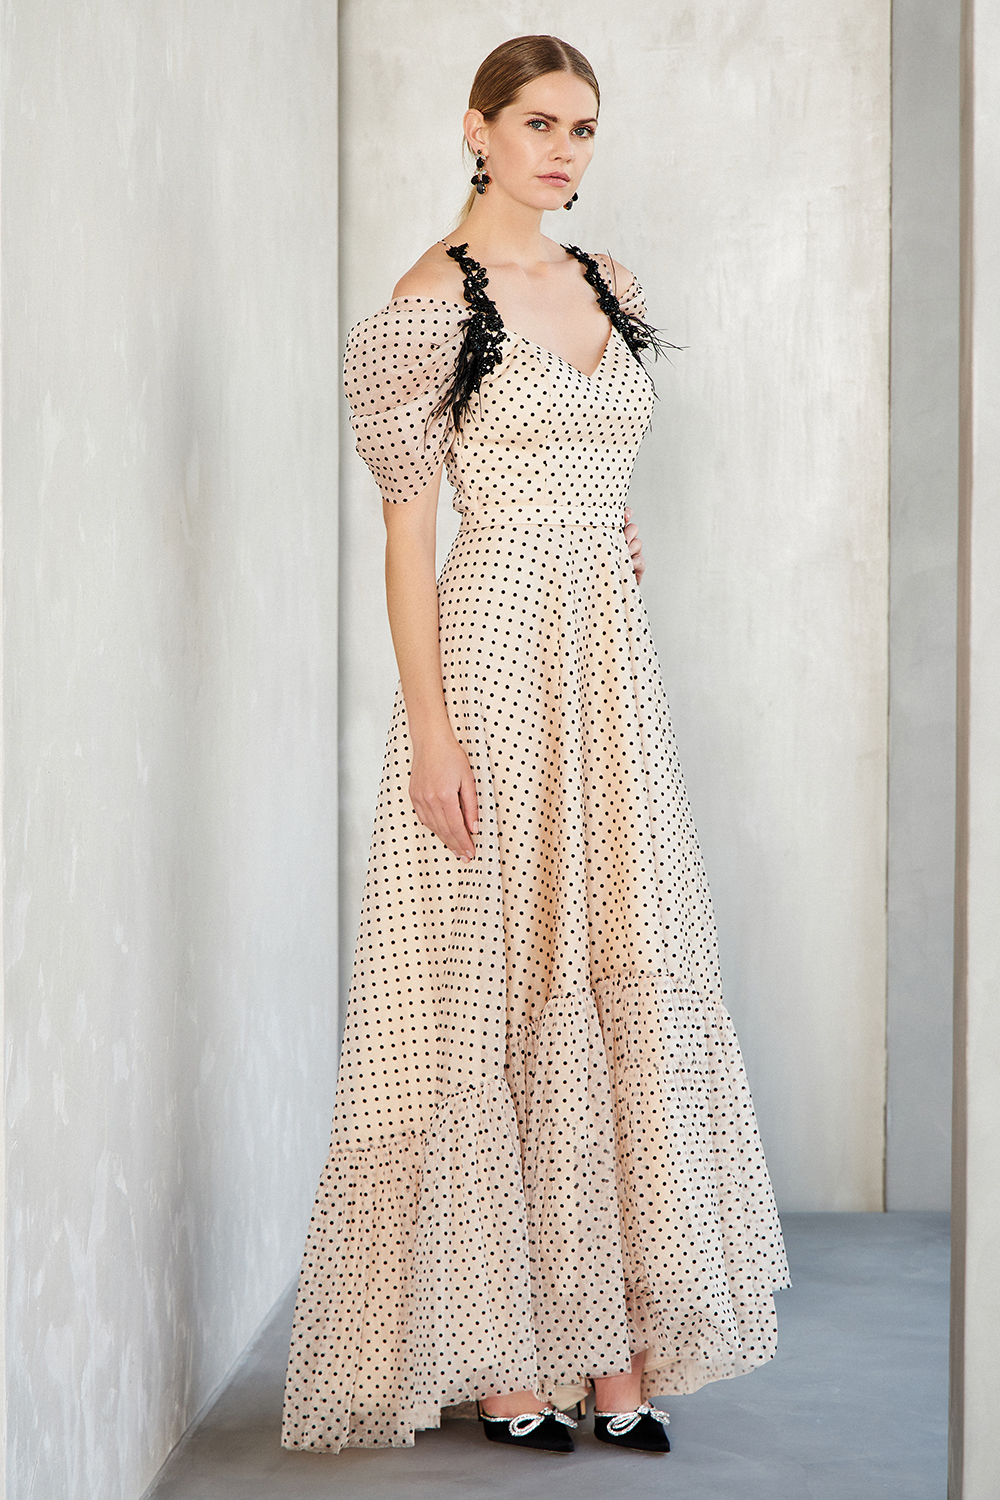 Long evening printed dress with beading at the top and short sleeves